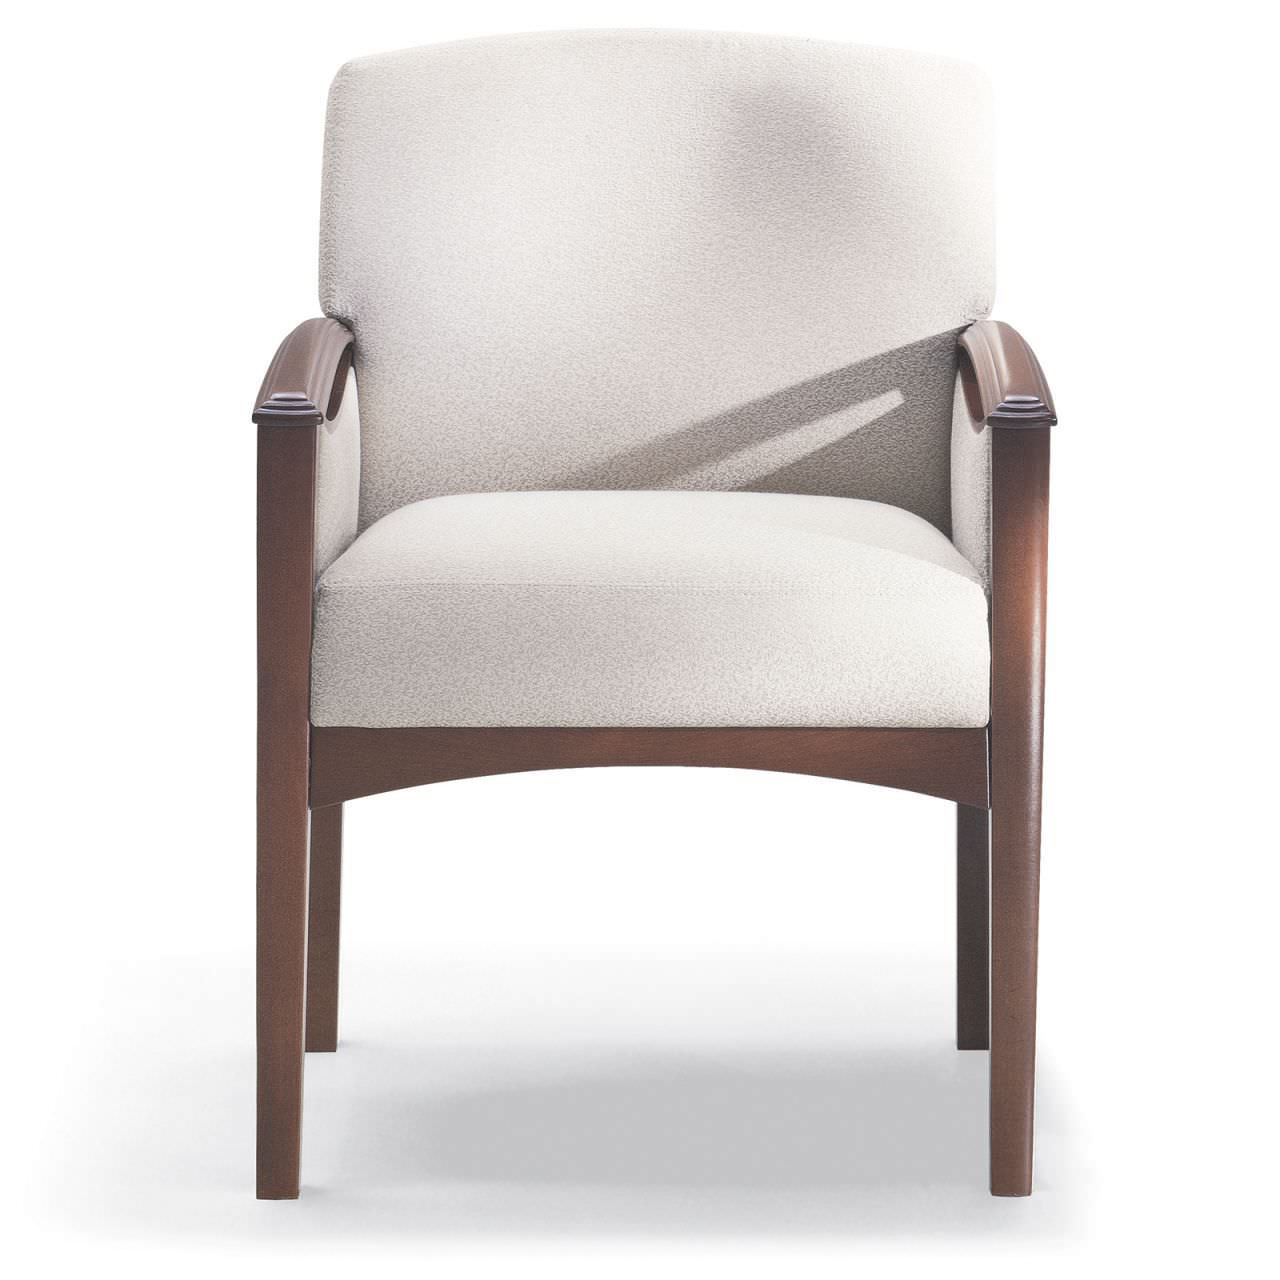 Chair with armrests Cities® Small Uptown Nemschoff